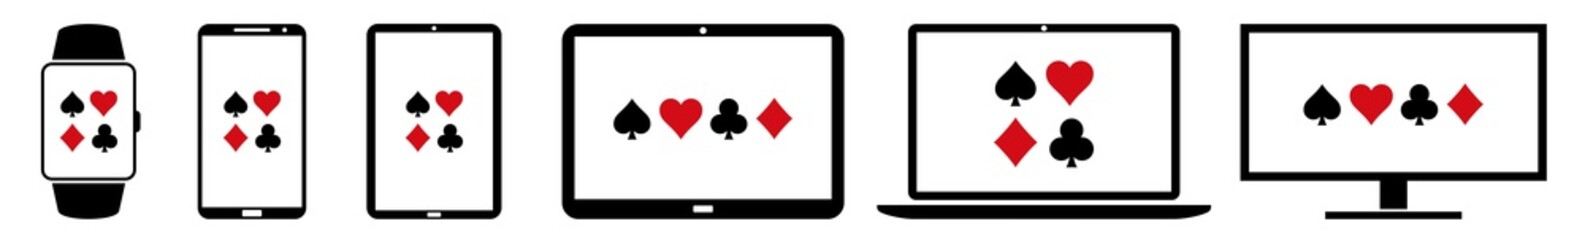 Display gambling, casino, playing, card, symbols, spade, diamond, heart, cross Icon Devices Set | Web Screen Device Online | Laptop Vector Illustration | Mobile Phone | PC Computer Tablet Sign